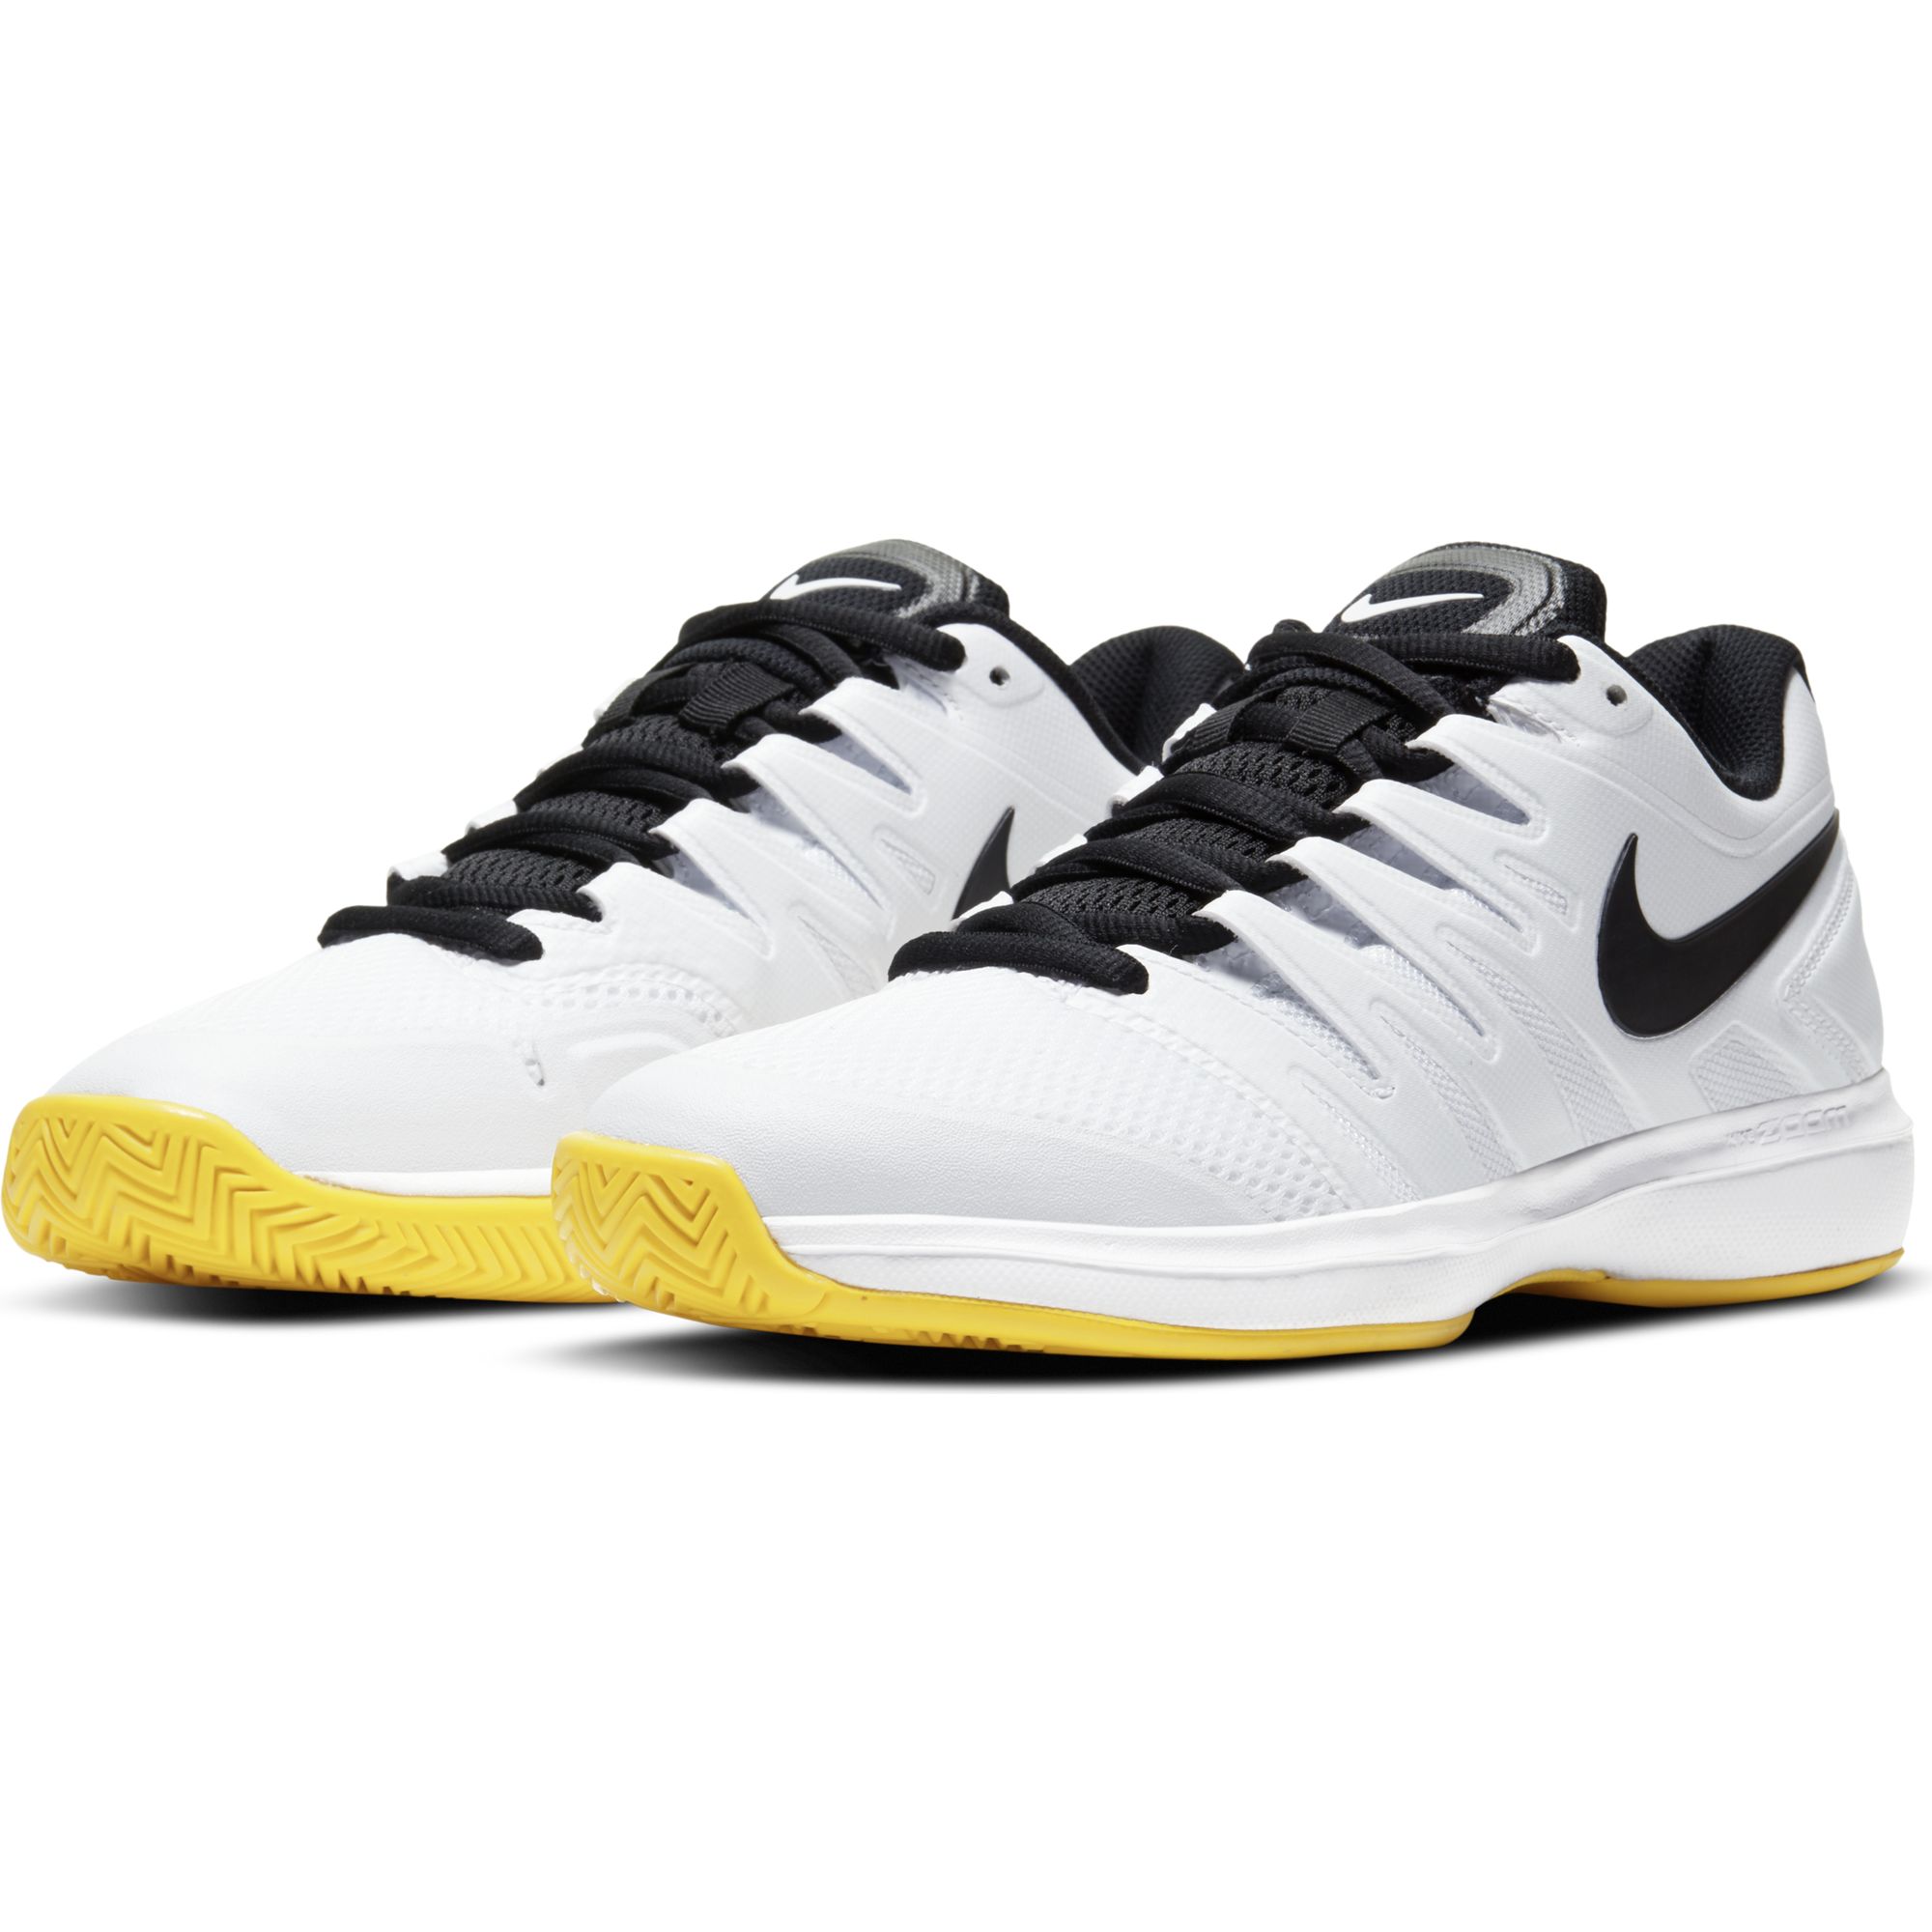 blackboard attribute plan MENS COURT AIR ZOOM PRESTIGE TENNIS SHOES WHITE AND SPEED YELLOW - TENNIS  EXPRESS BLOG